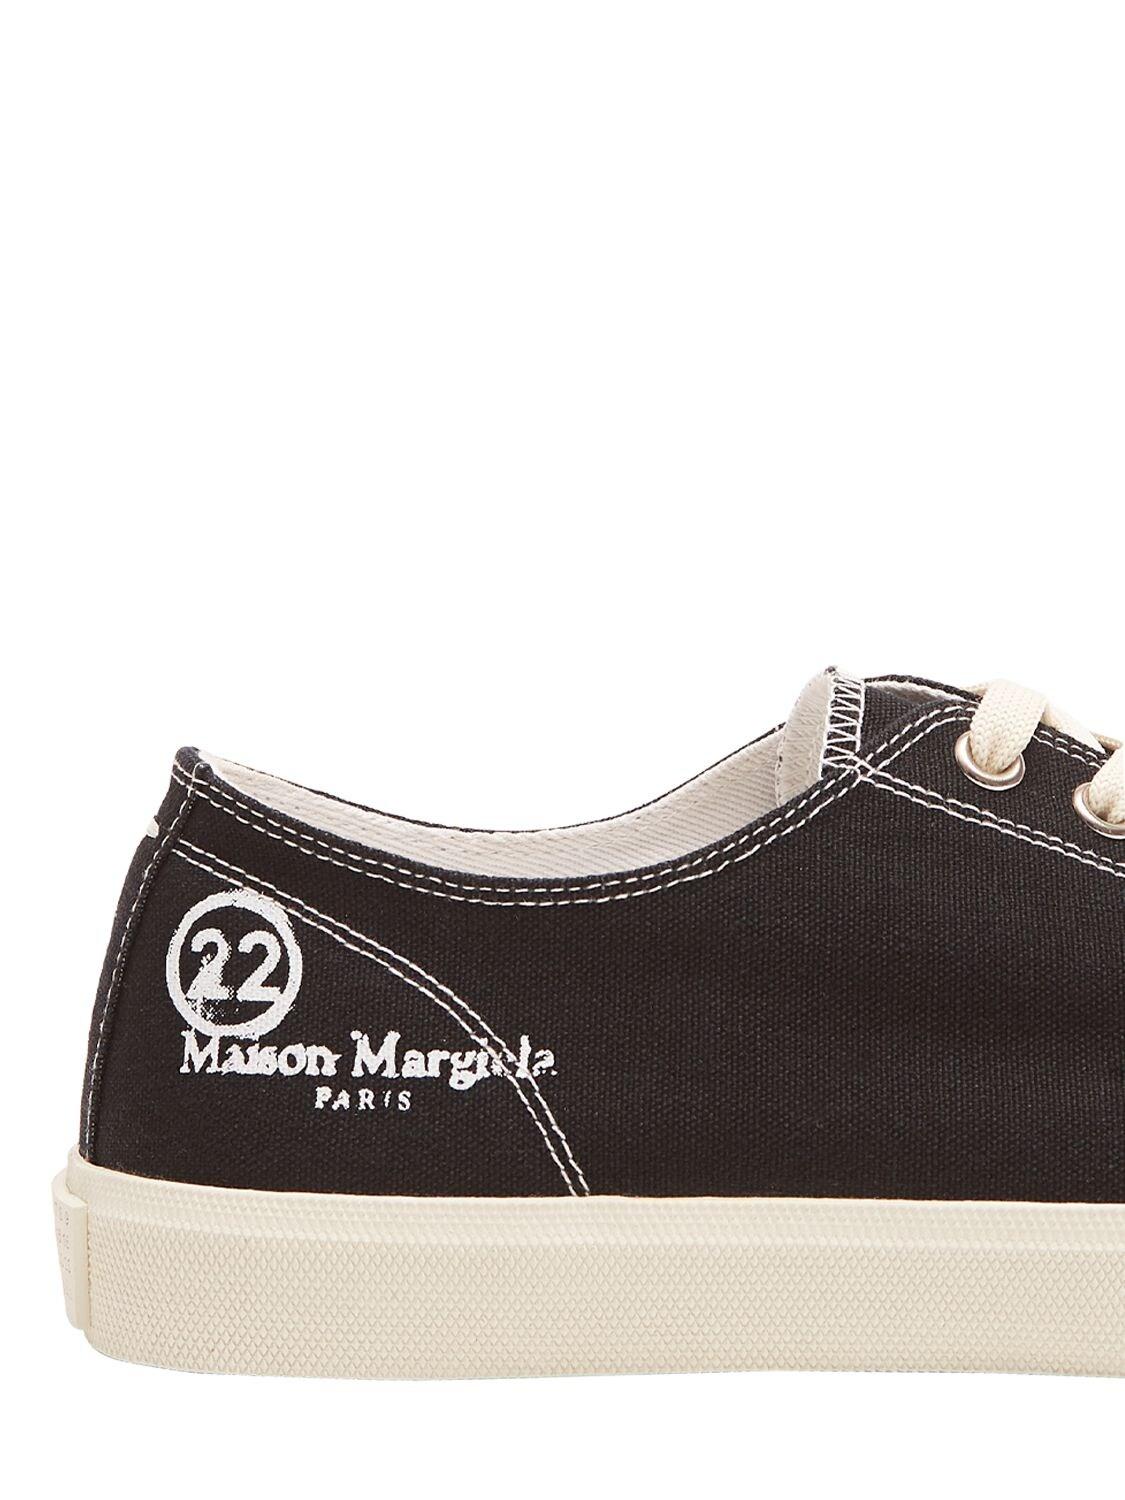 Maison Margiela Tabi Low Top Canvas Trainers in Black for Men 